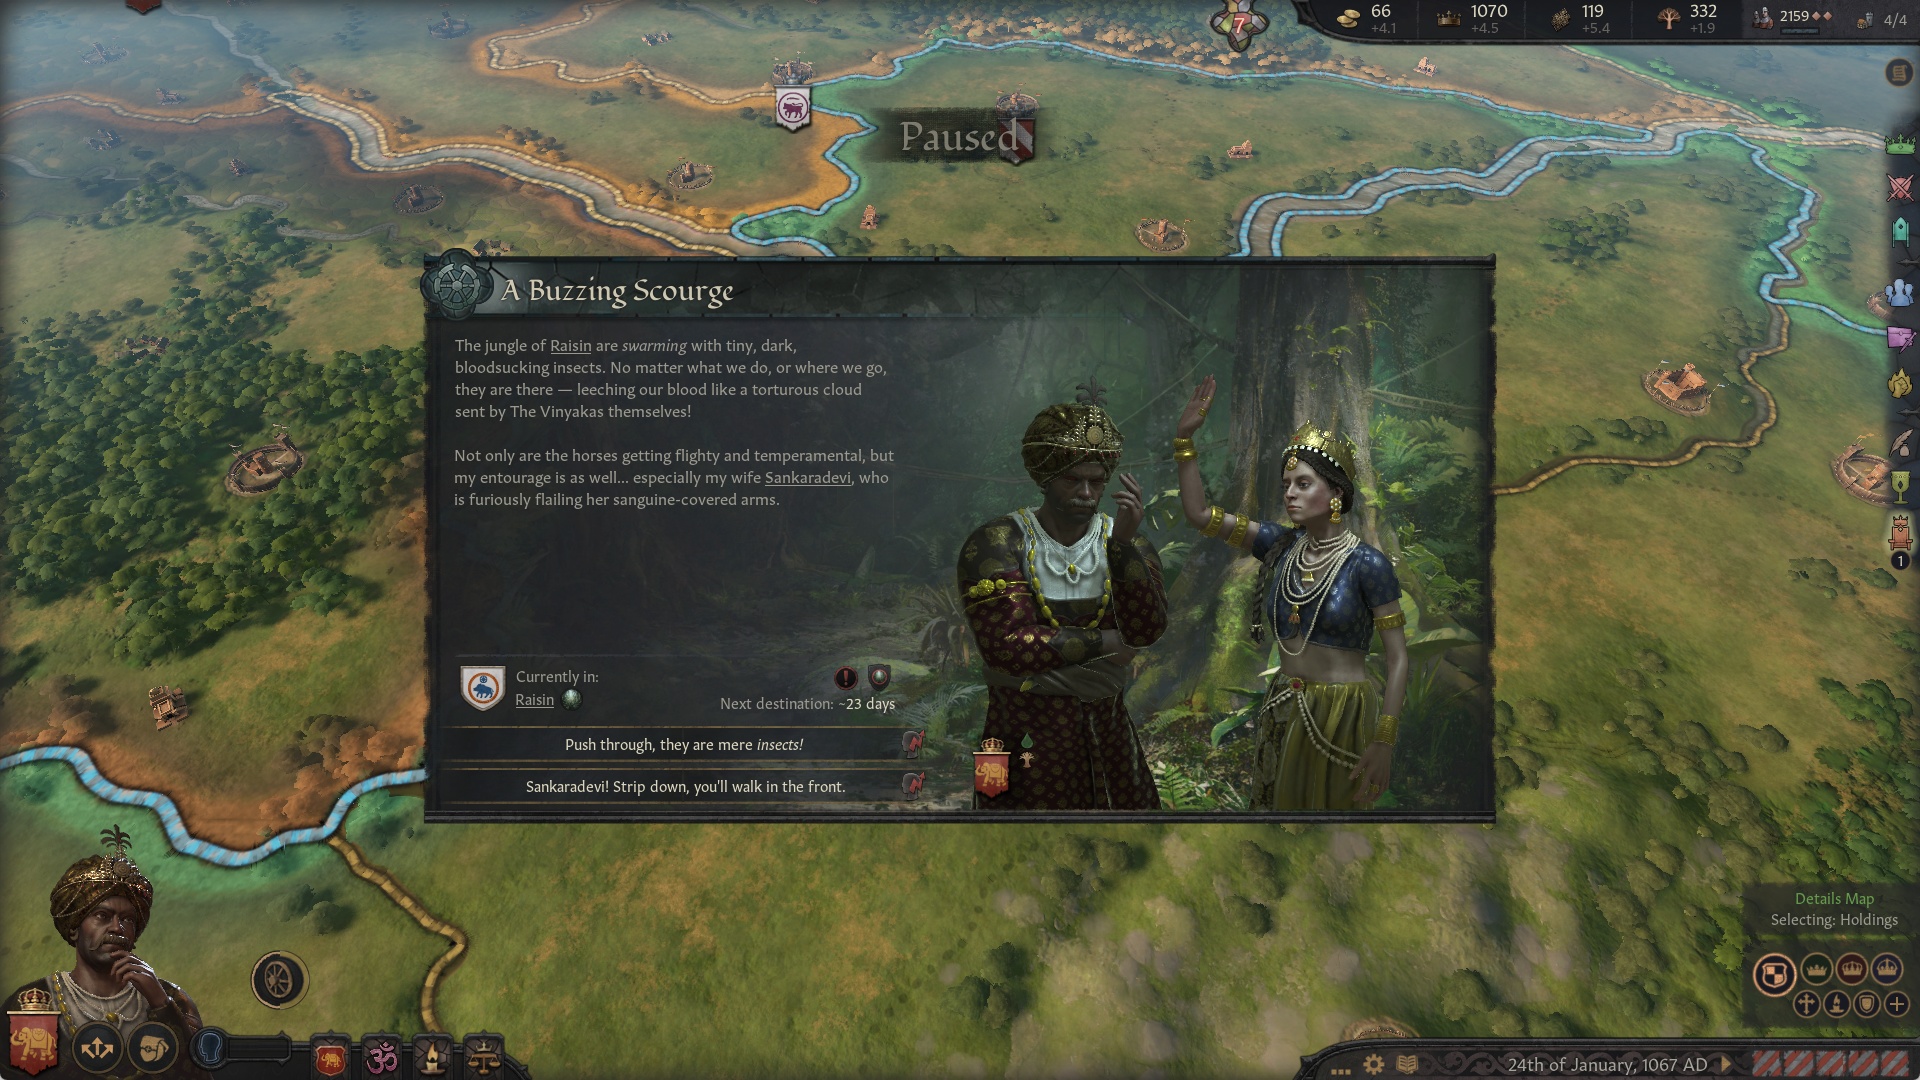 (Especially the entertaining events set Crusader Kings 3 apart from the standard genre.)